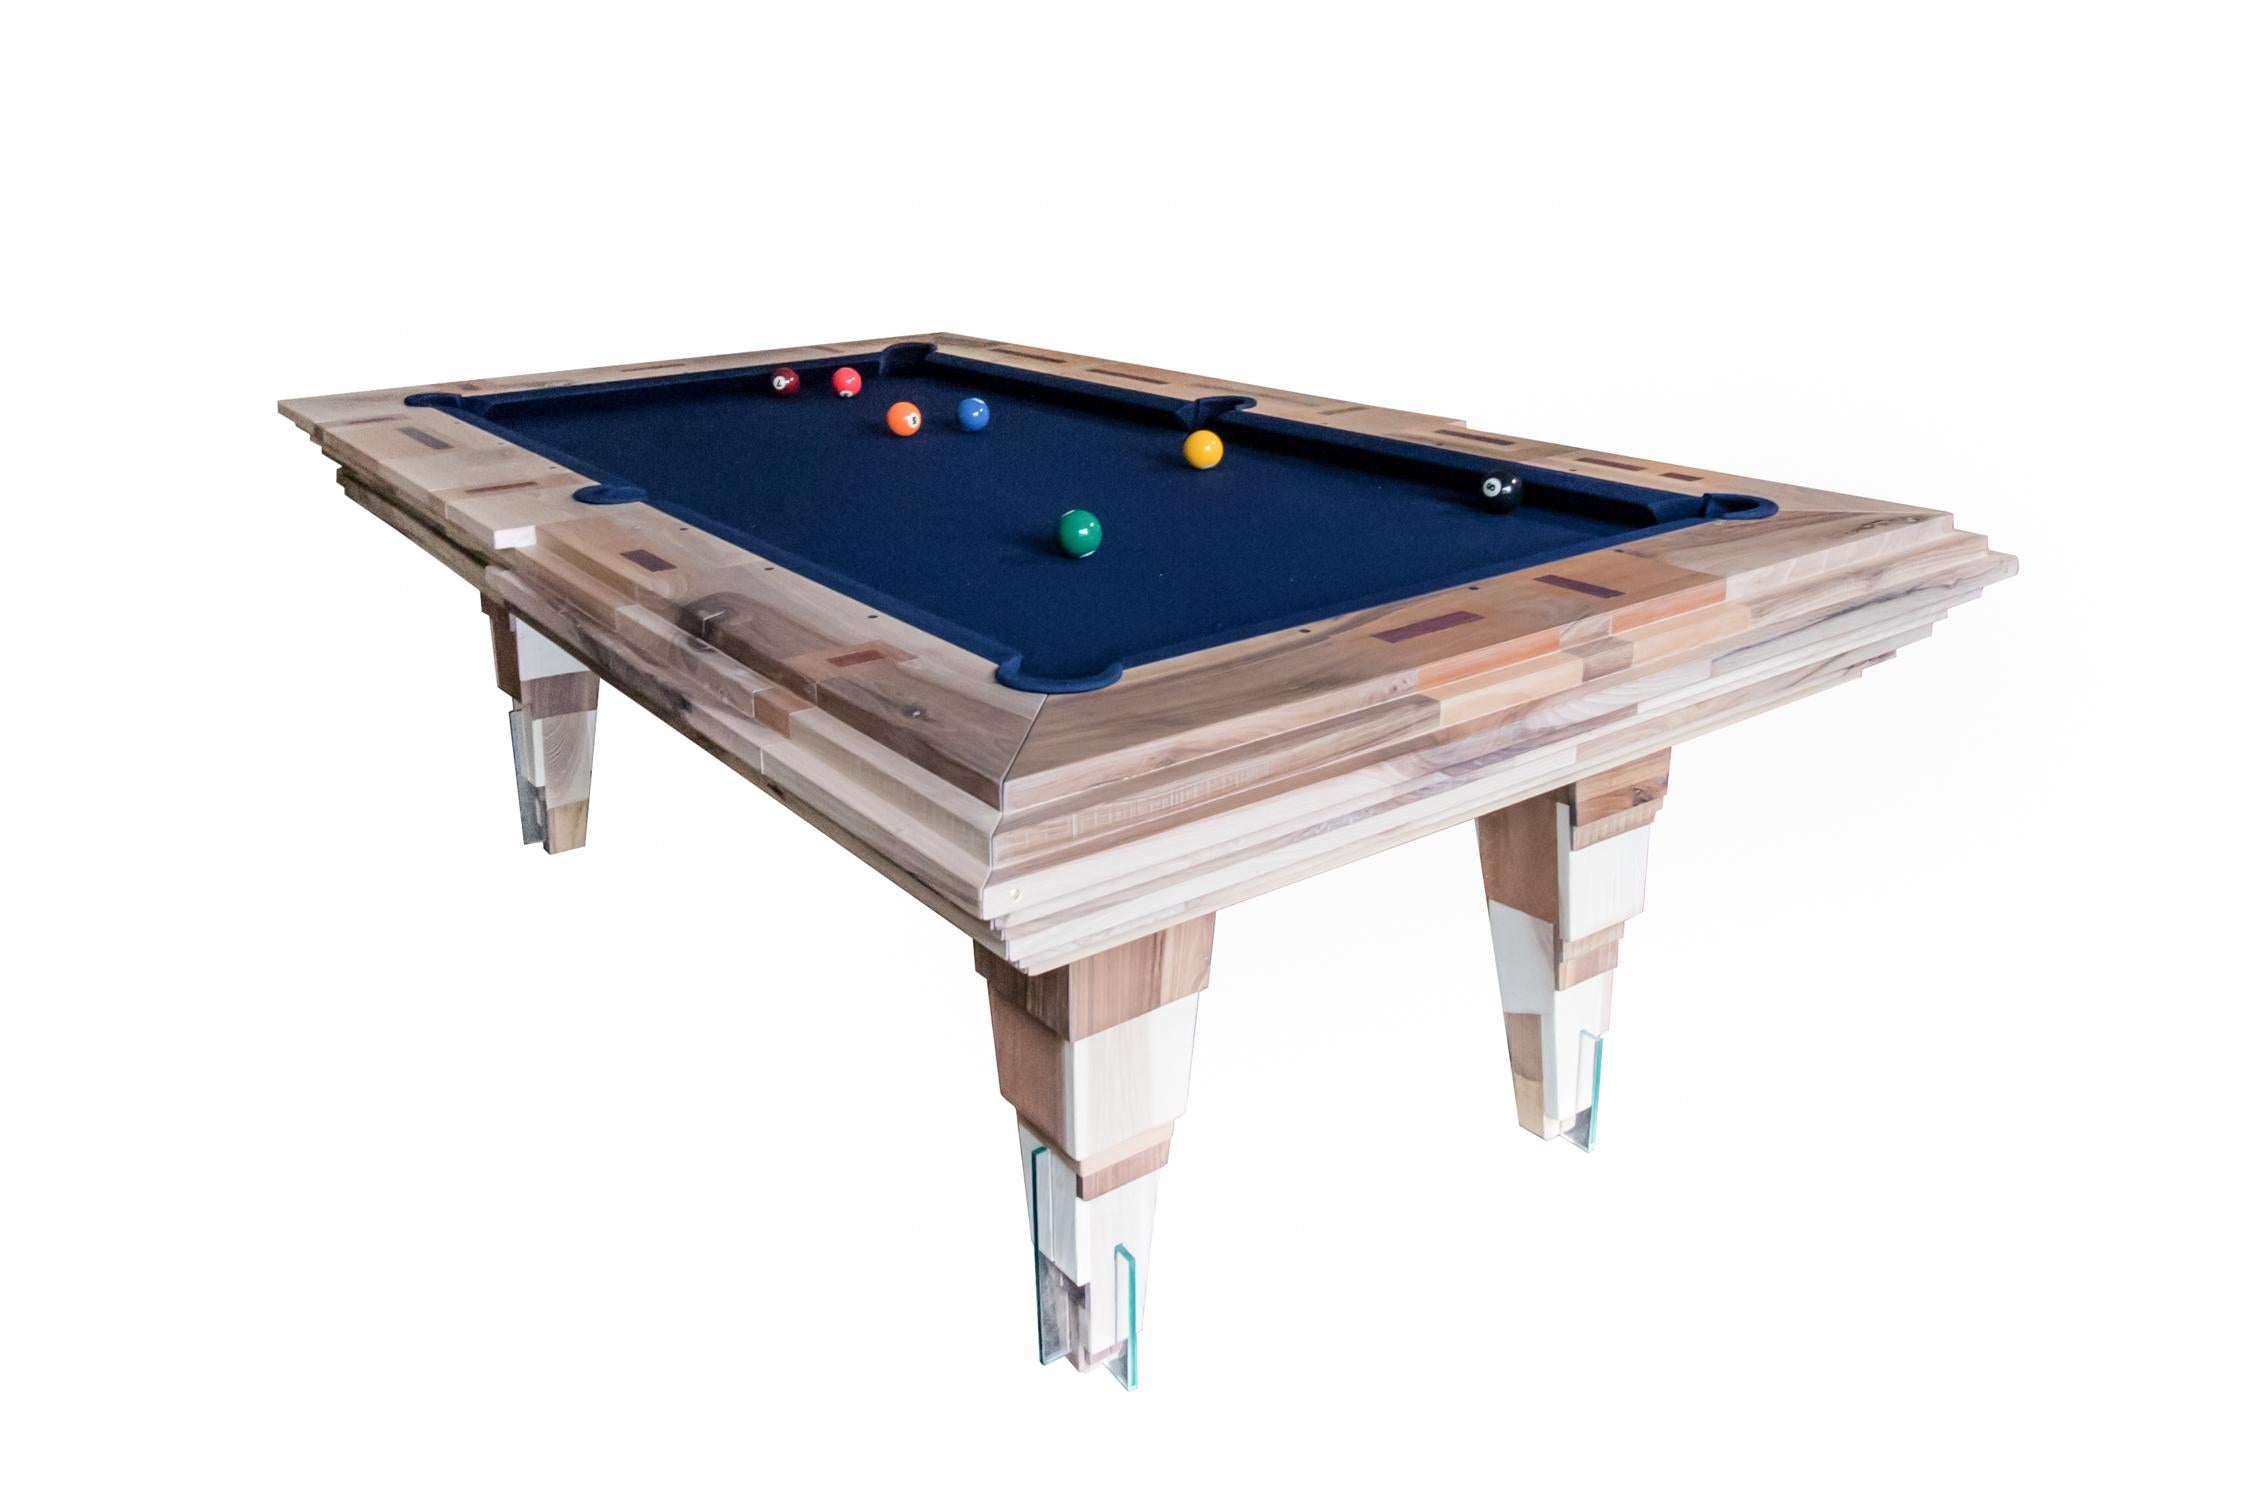 The pool table light tropics is a collaboration between Hillsideout and Hermelin Billiards Milan – leader in the industry since 1825 – and was built around the concepts of elegance, light, contemporary and handmade design.

After the first